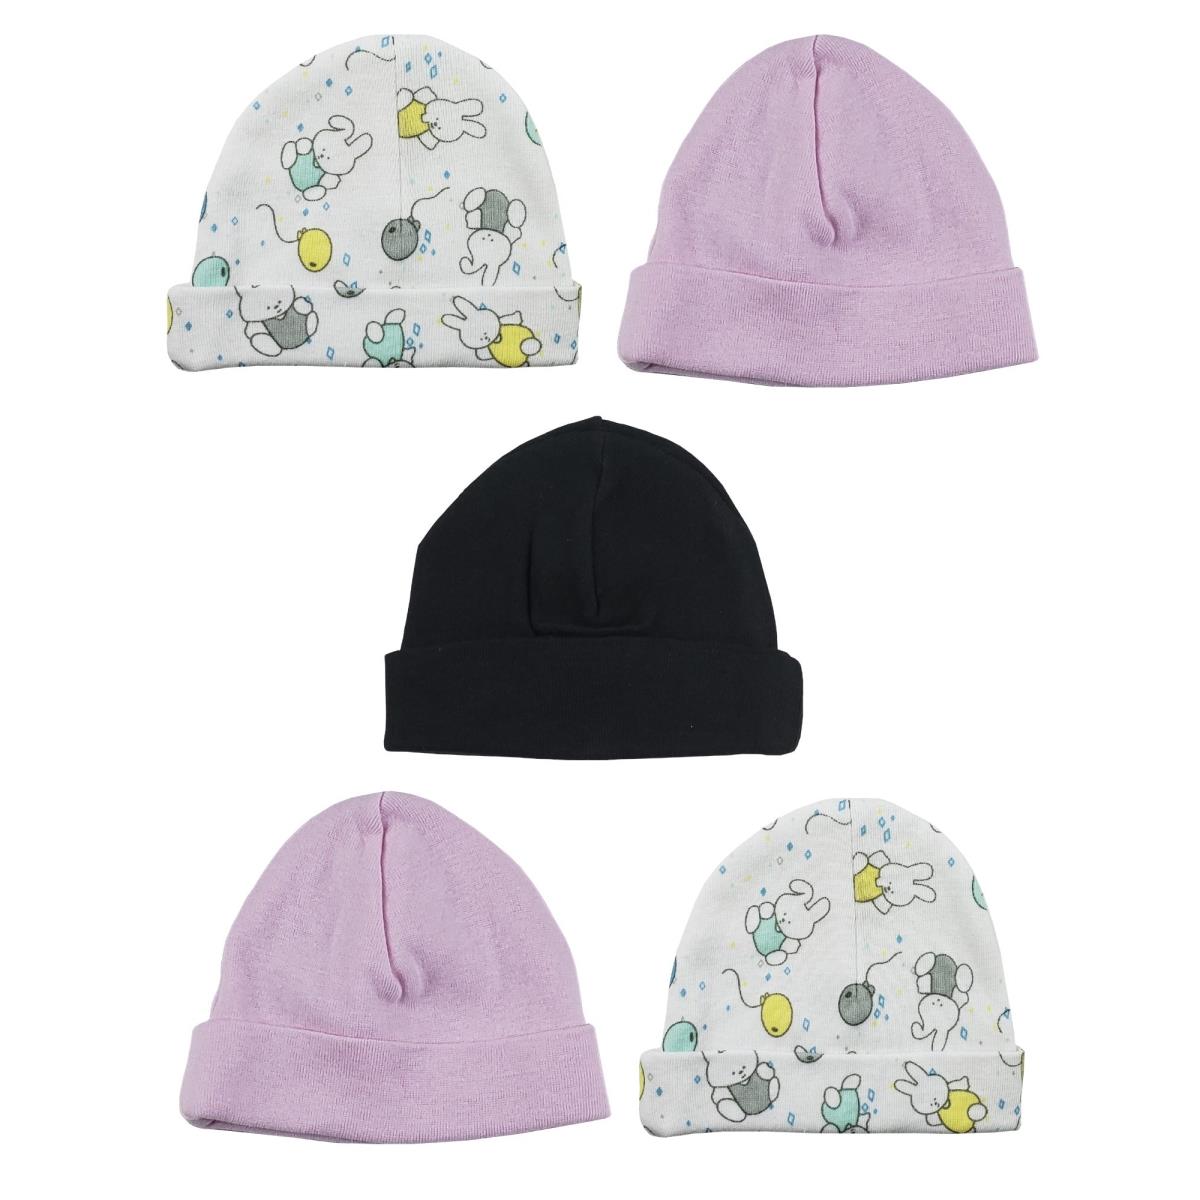 Picture of Bambini LS-0327 Girls Baby Cap - Black&#44; Prints & Pink - One Size - 5 per Pack